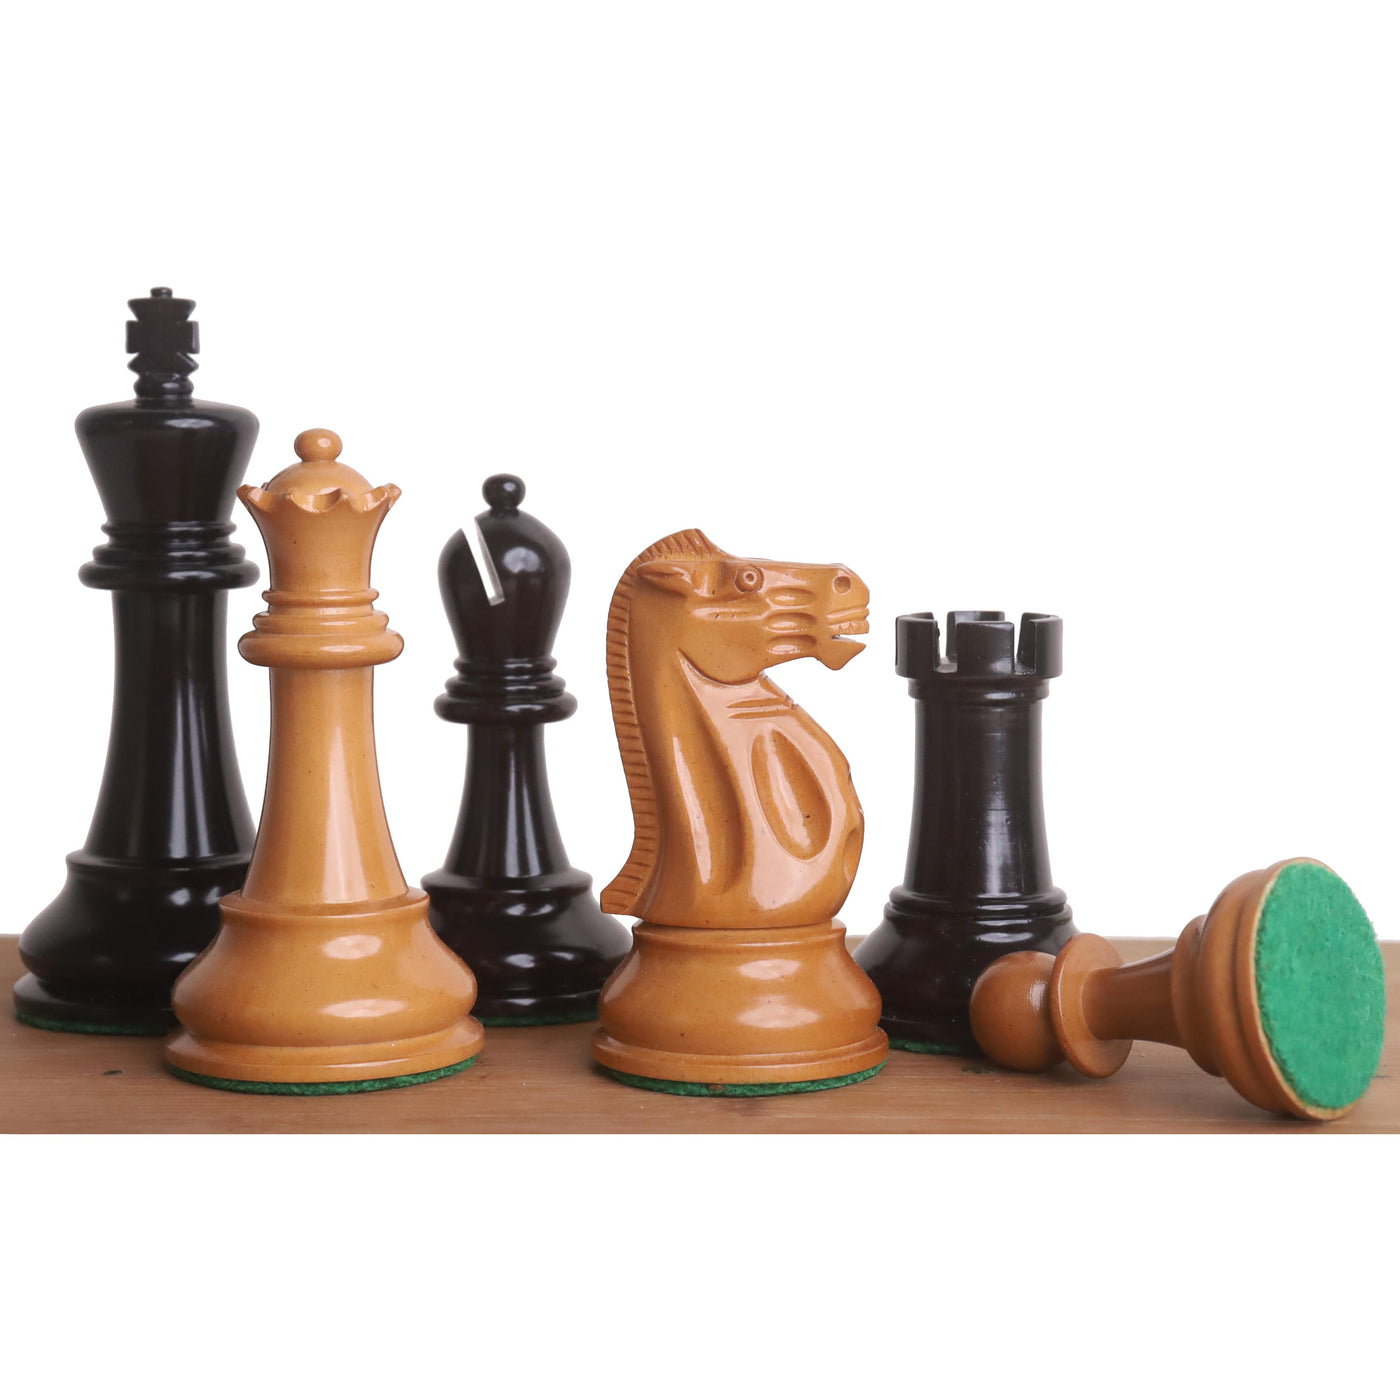 Combo of 3.9" Lessing Staunton Chess Set - Pieces in Natural Ebony Wood & Antiqued Lacquered Boxwood with Board and Box